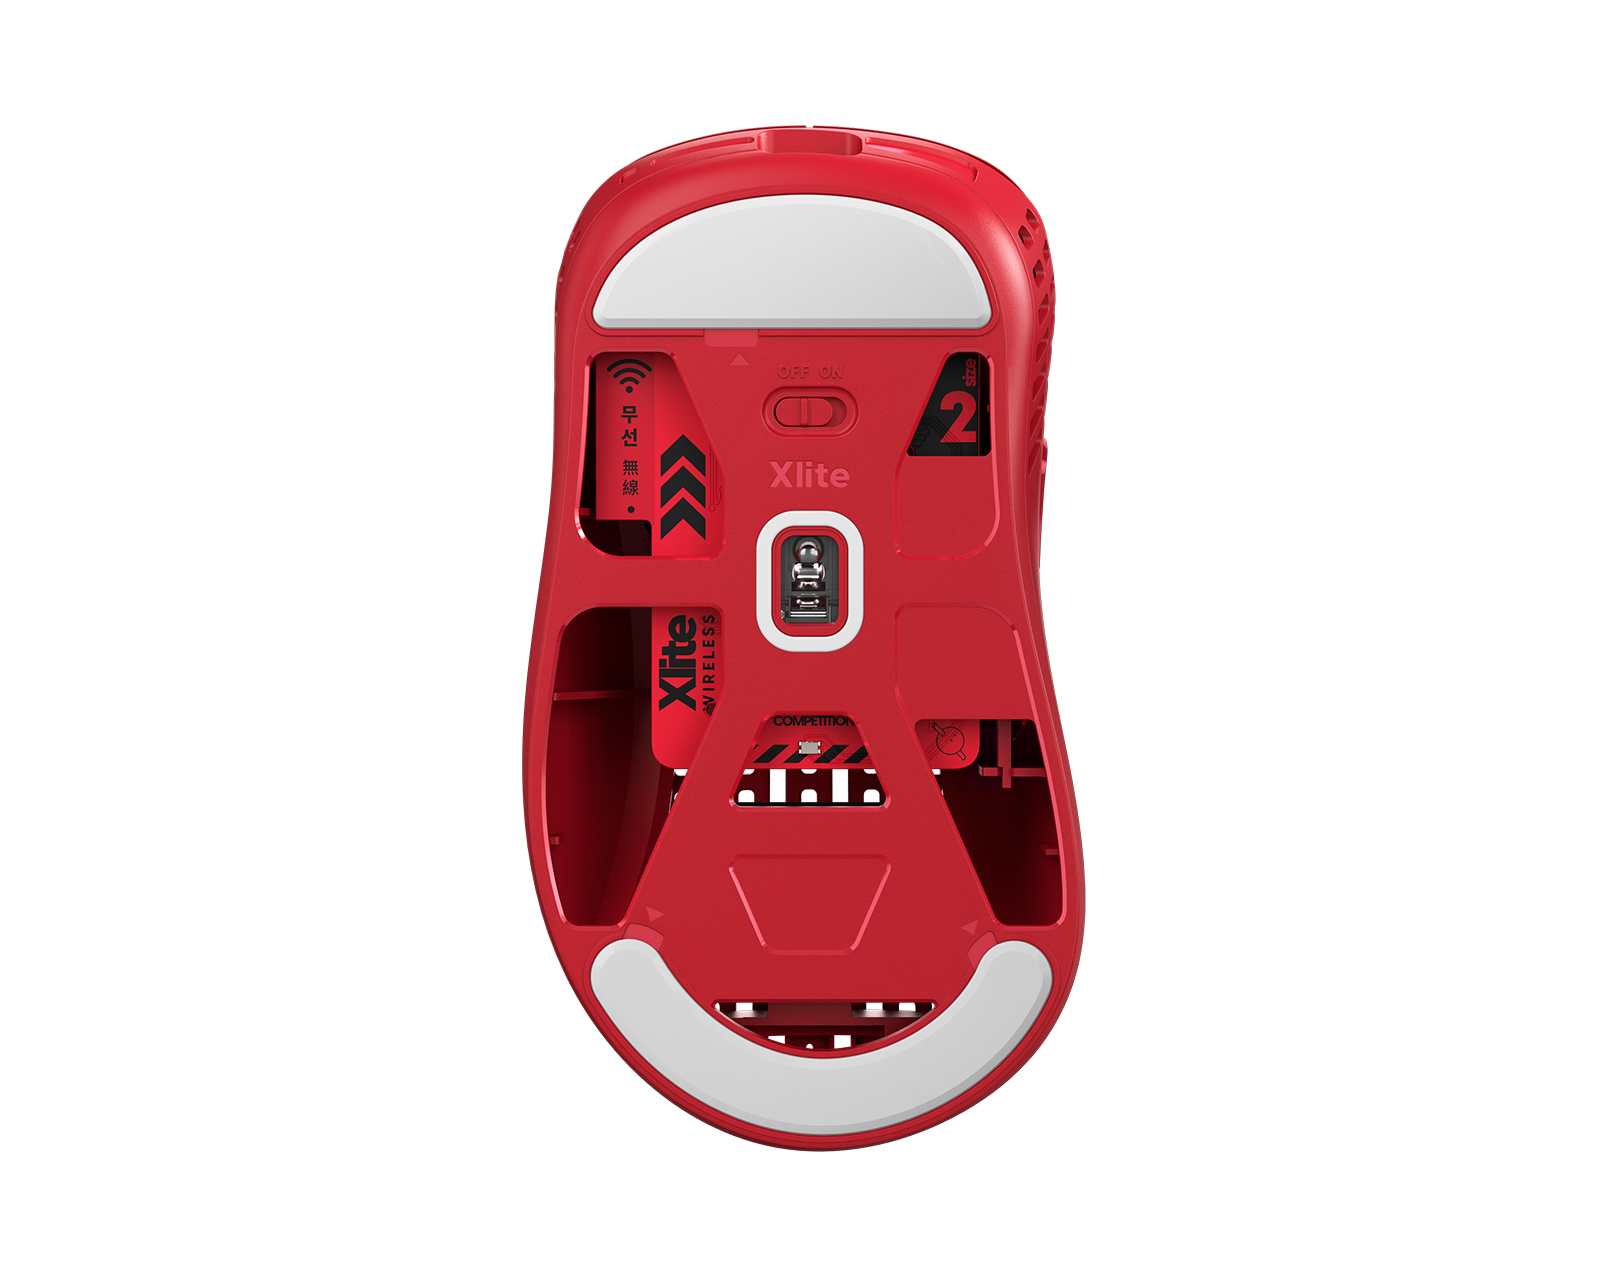 Pulsar Xlite Wireless v2 Competition Gaming Mouse - Red - Limited Edition